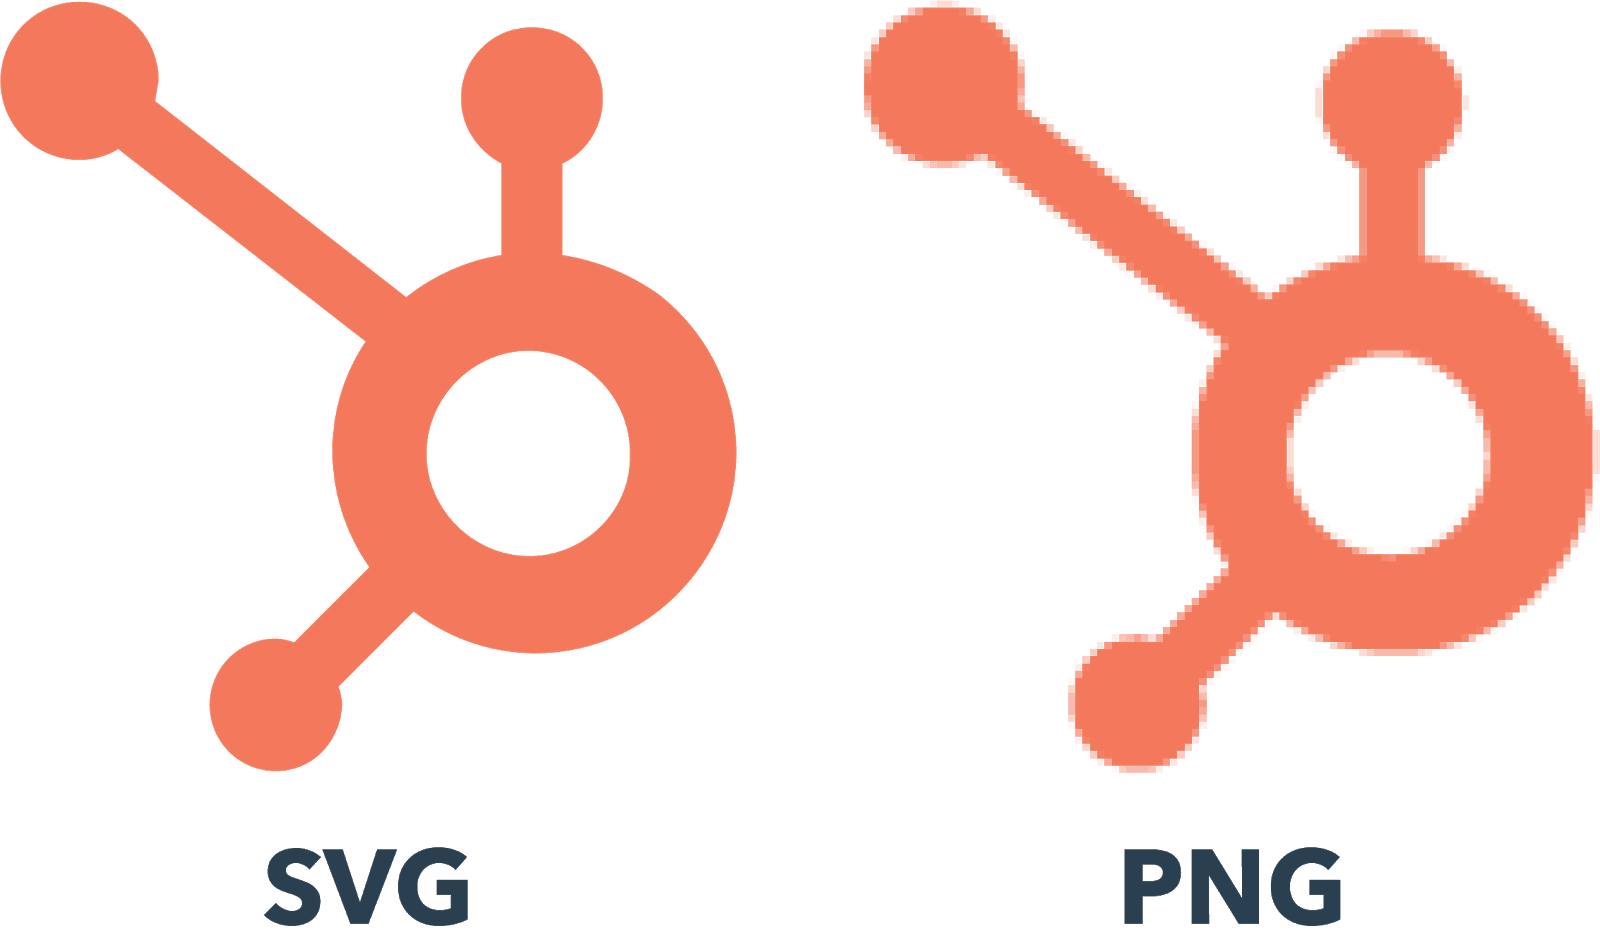 SVG-difference